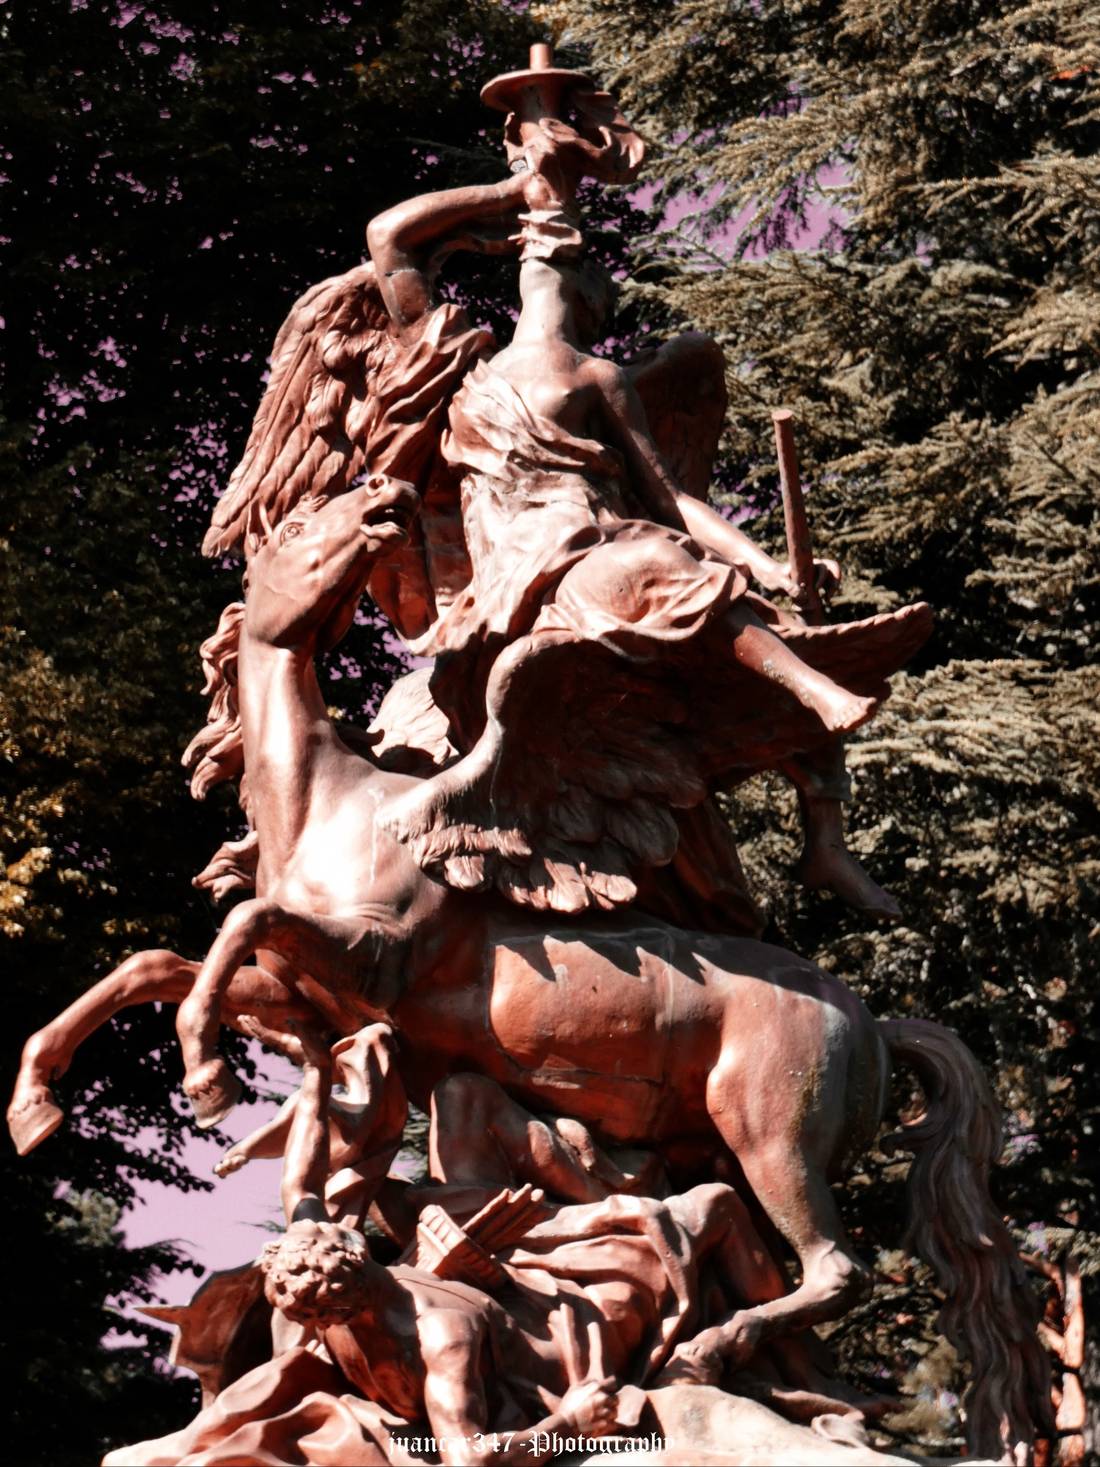 The winged horse, Pegasus, crowns the fountain